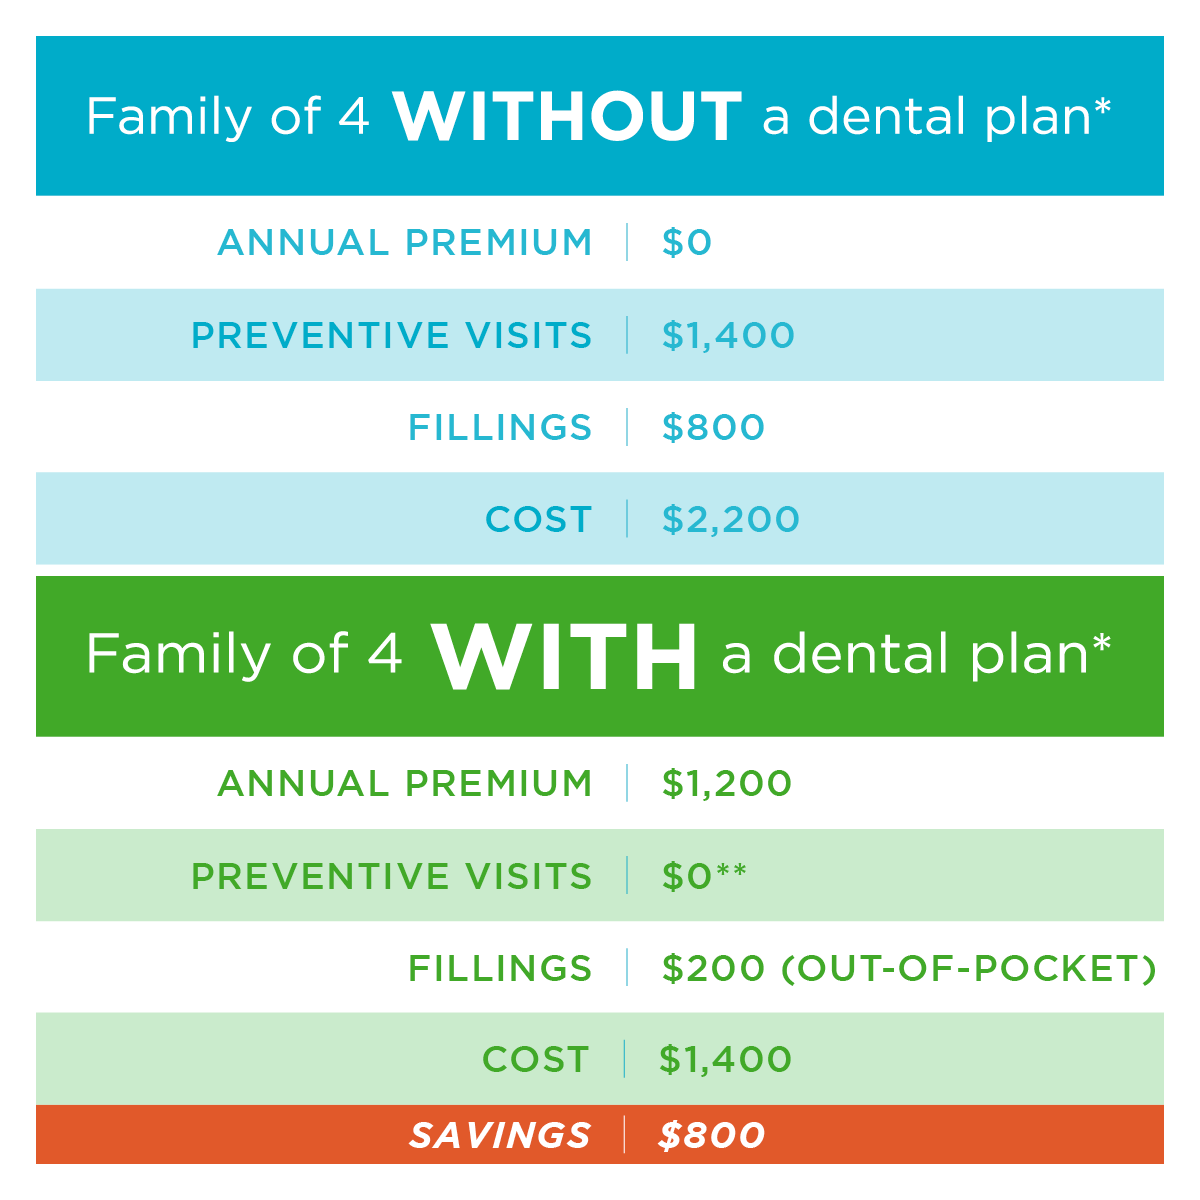 Why have dental insurance? Learn how dental insurance can protect your oral health and reduce dental